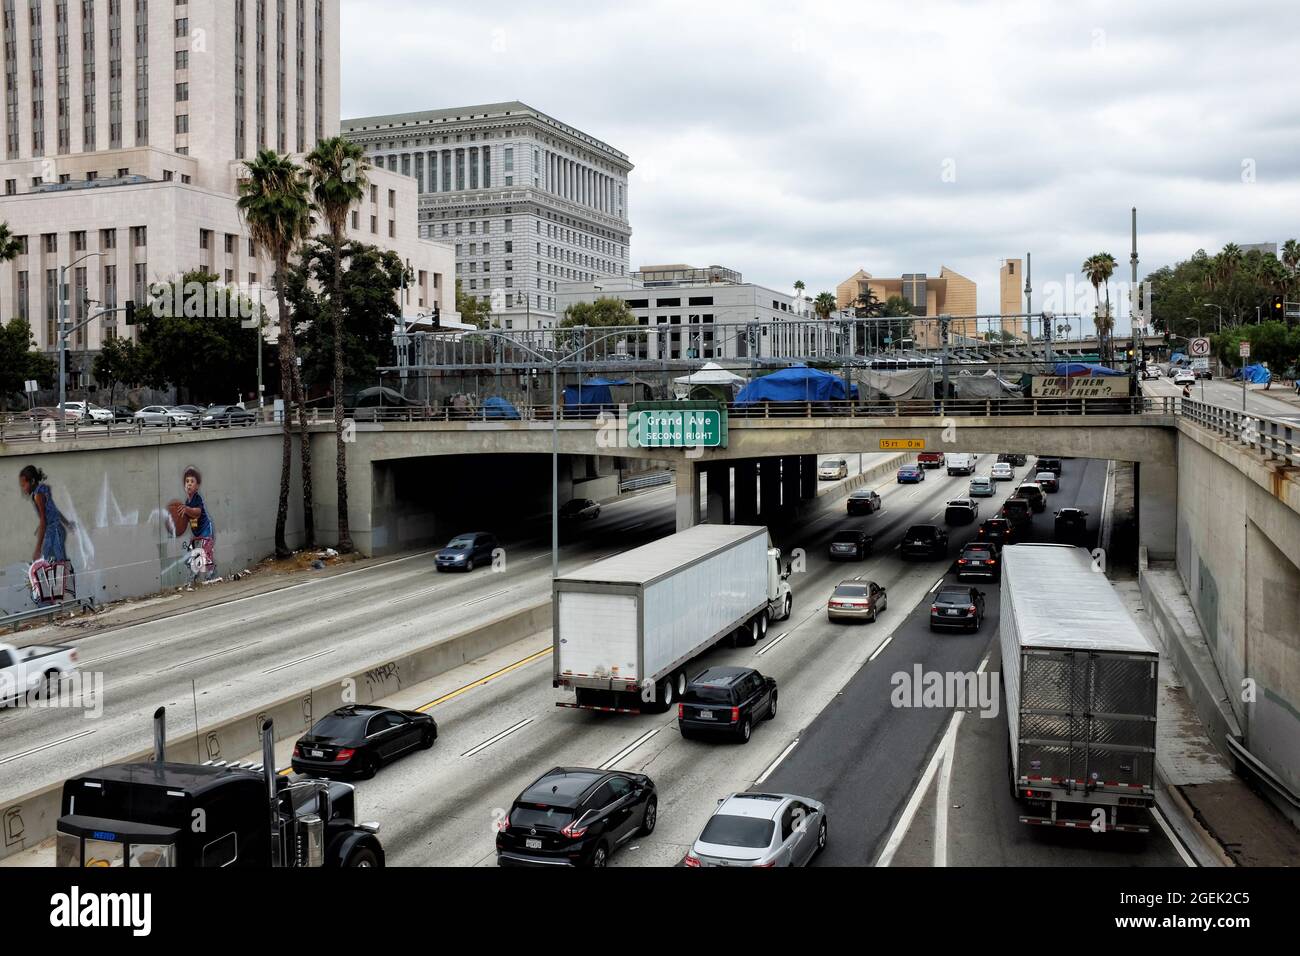 LOS ANGELES, CALIFORNIA - 18 AUG 2021: The 101 Freeway from Los Angeles Street with a homeless encampment on the Main Street overpass. Stock Photo